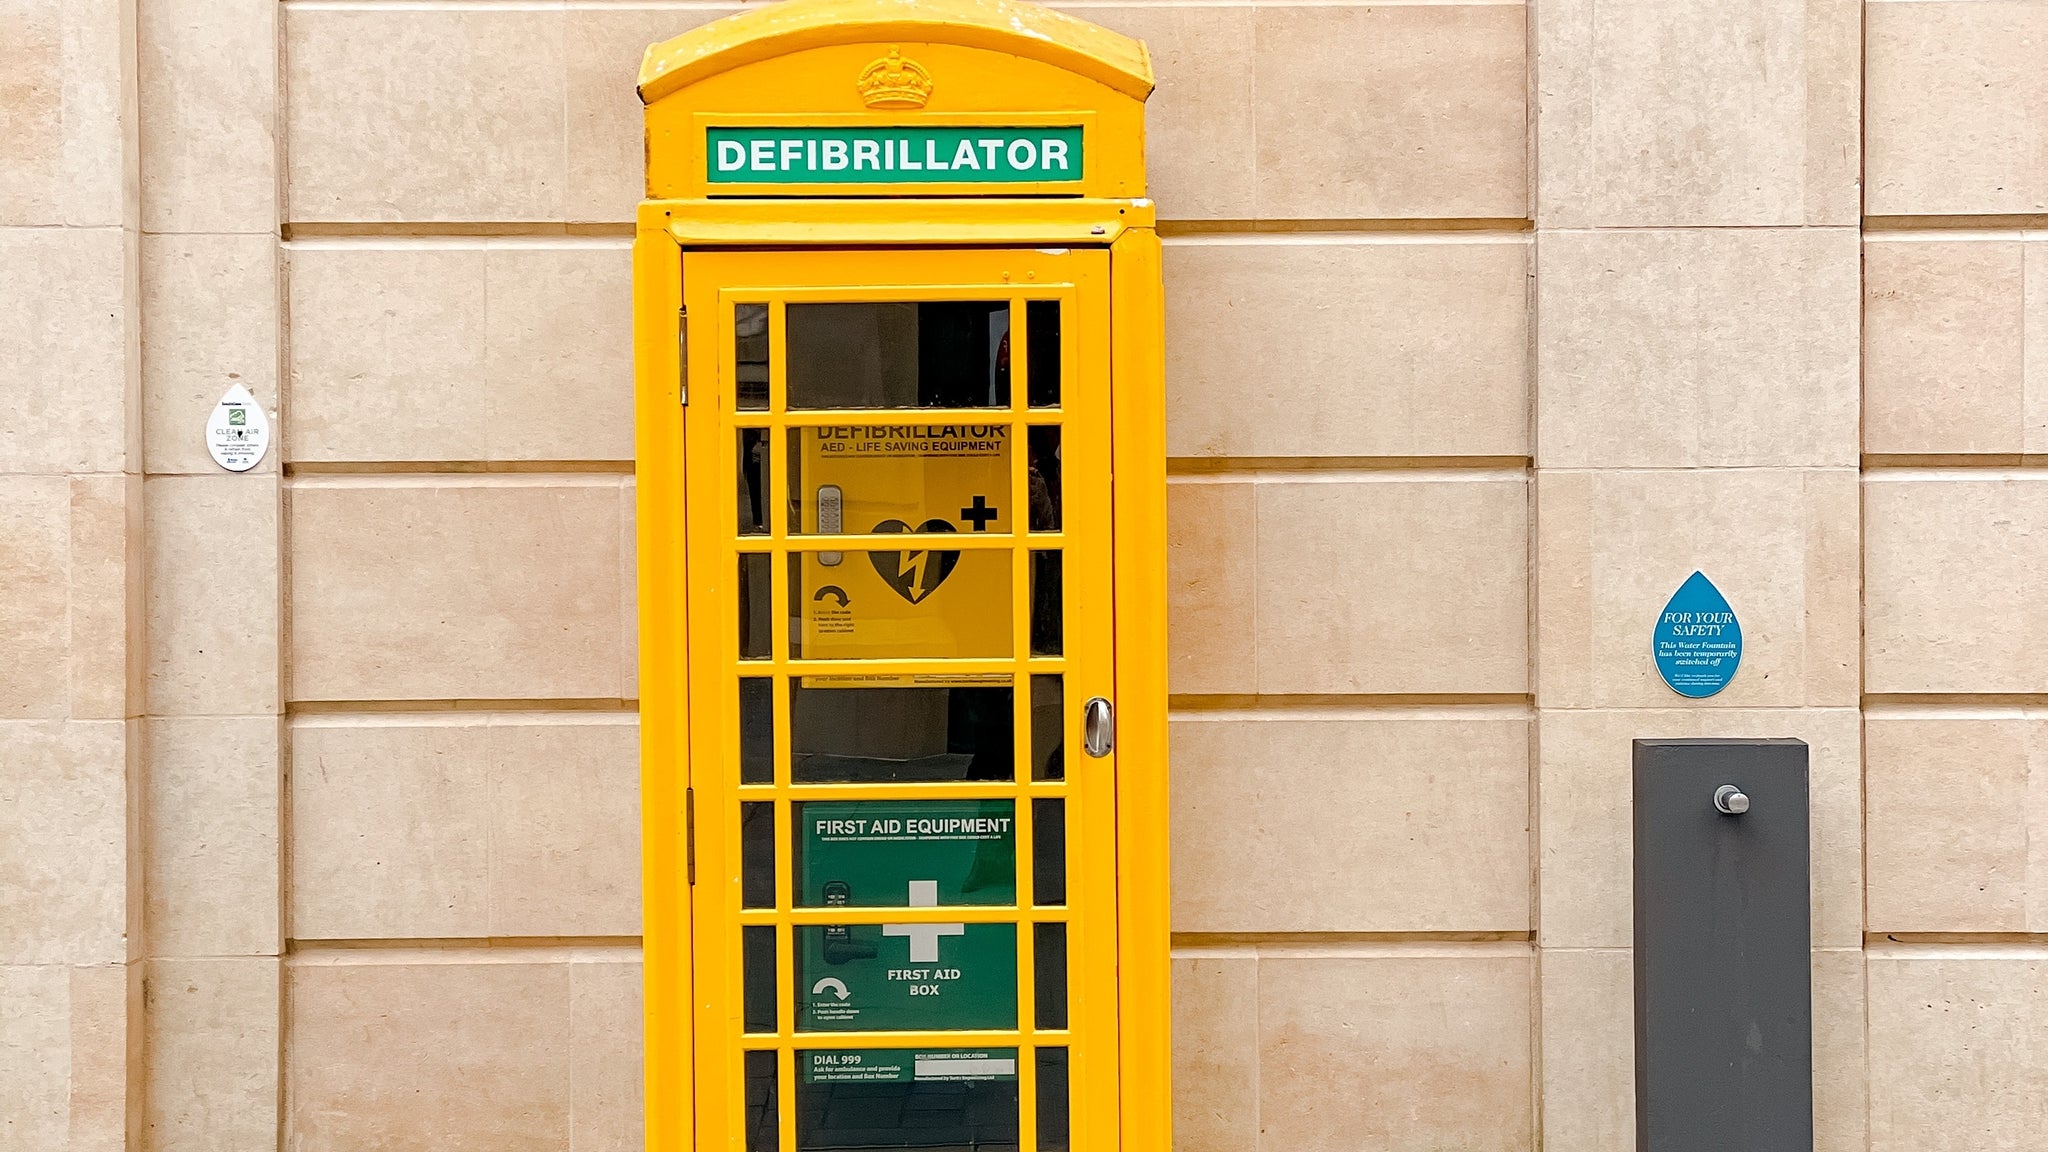 Defibrillator in yellow telephone booth